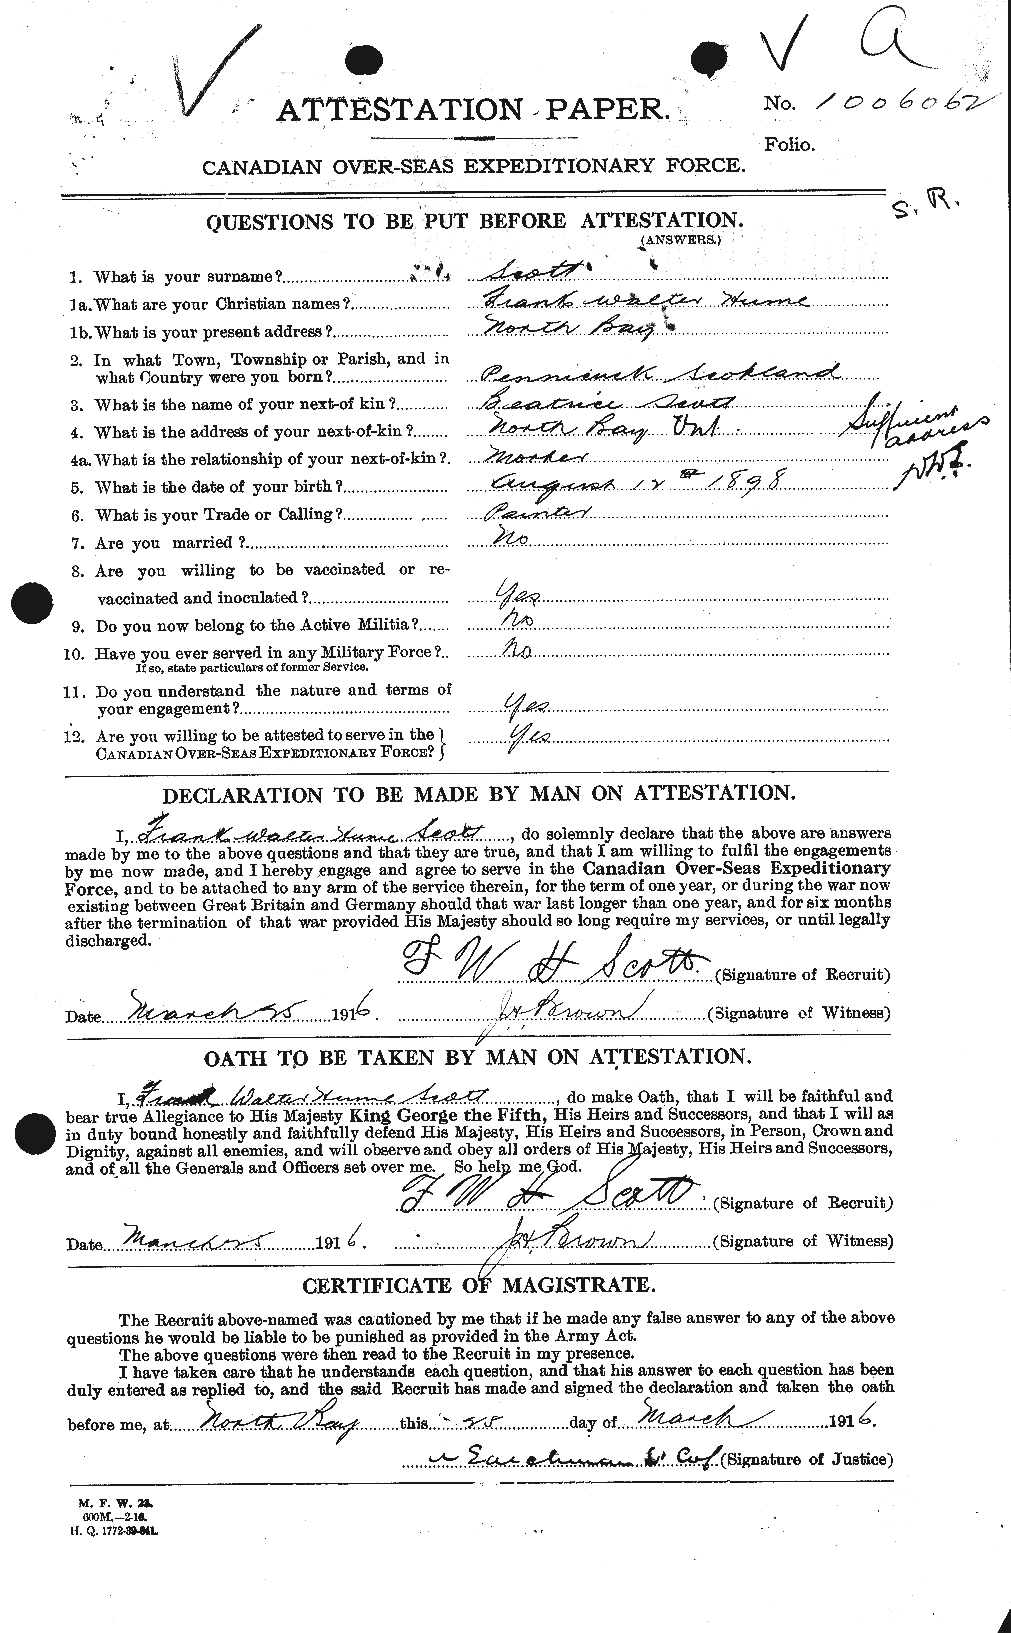 Personnel Records of the First World War - CEF 084689a